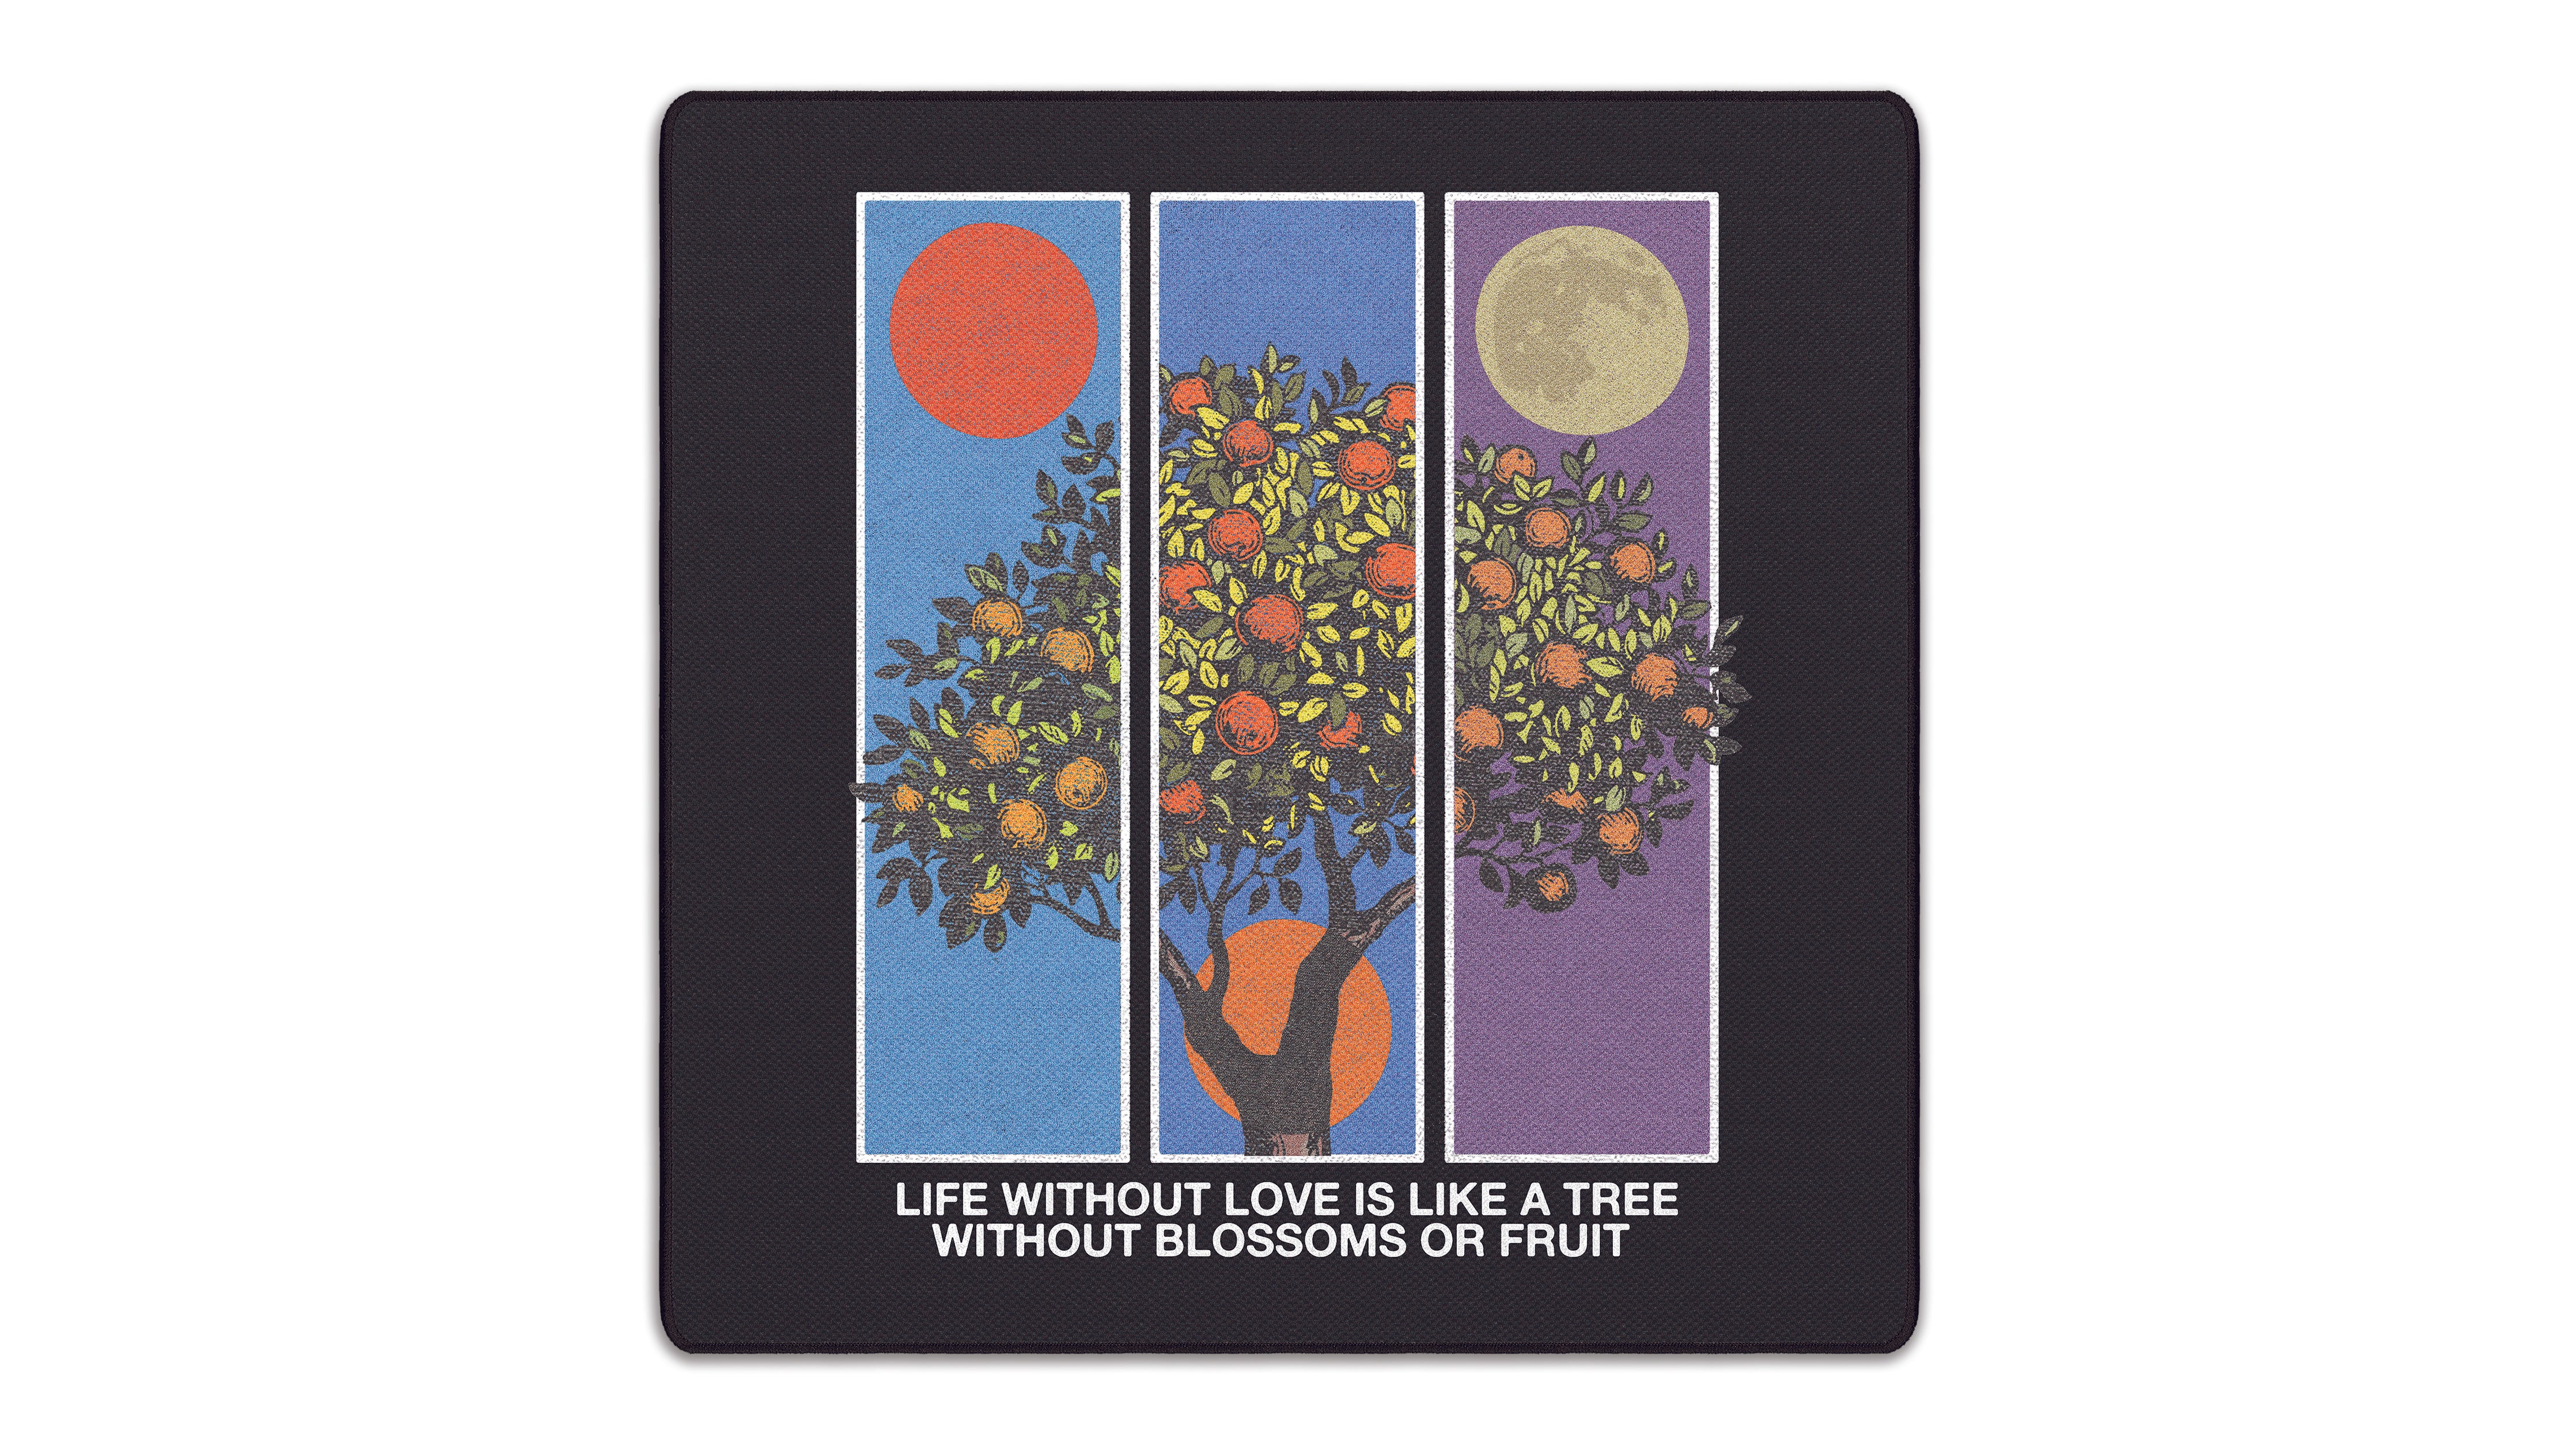 Life without Love by OZGMX - The Mousepad Company